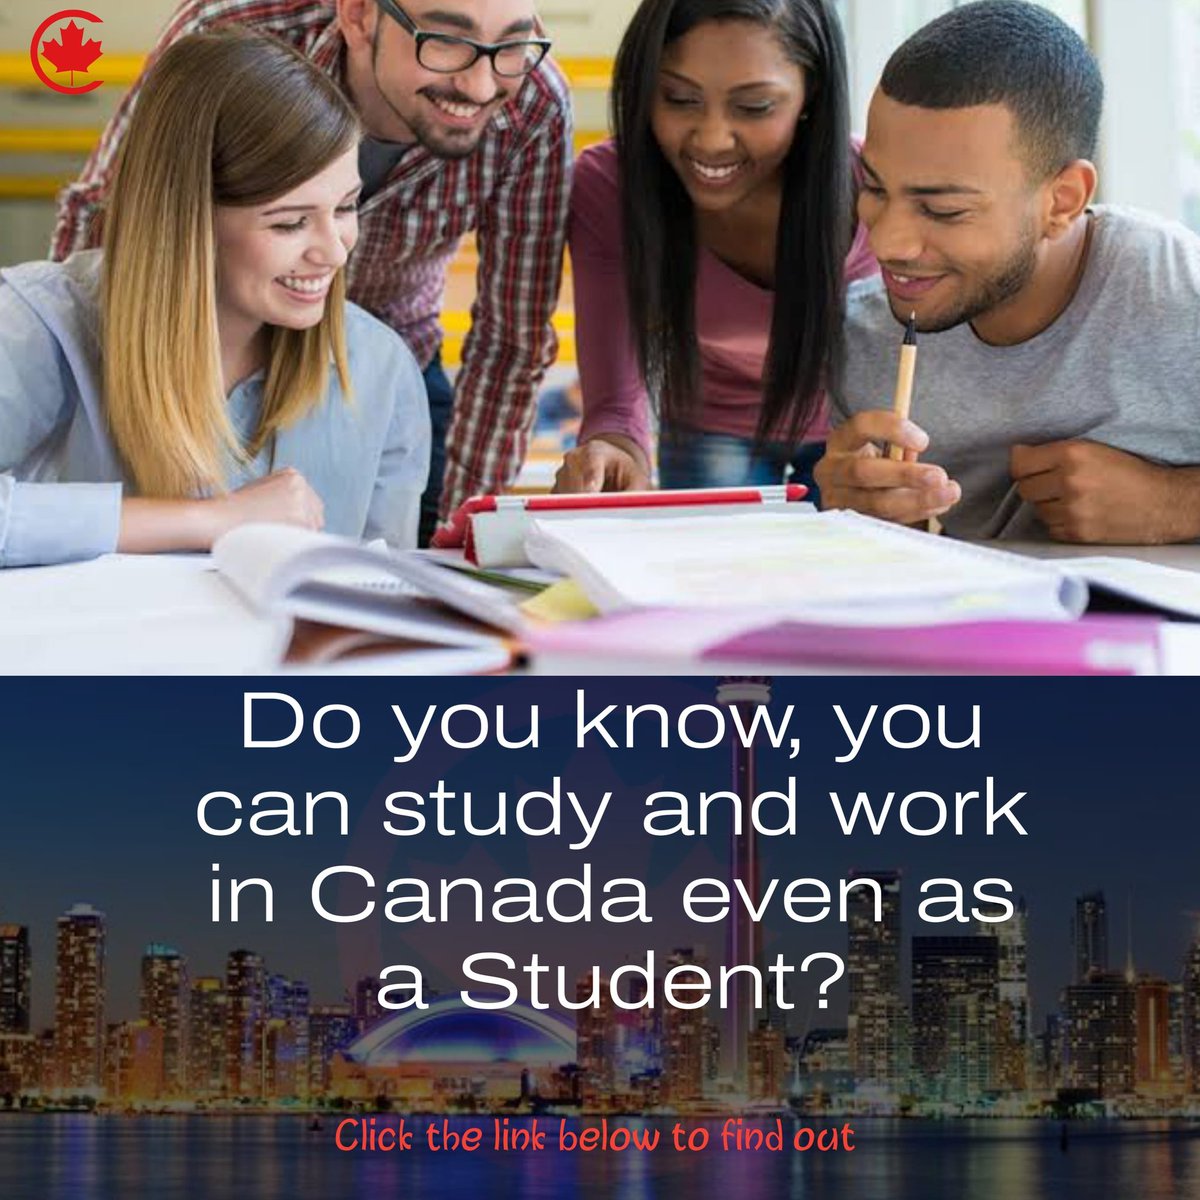 Do you know you can both Study and work in Canada even as a student, find out more in the link below

youtube.com/watch?v=5gSLtB…

#canadianschools #Canadian #canadaworkpermit #canadajapaguide #Canada #workpermit